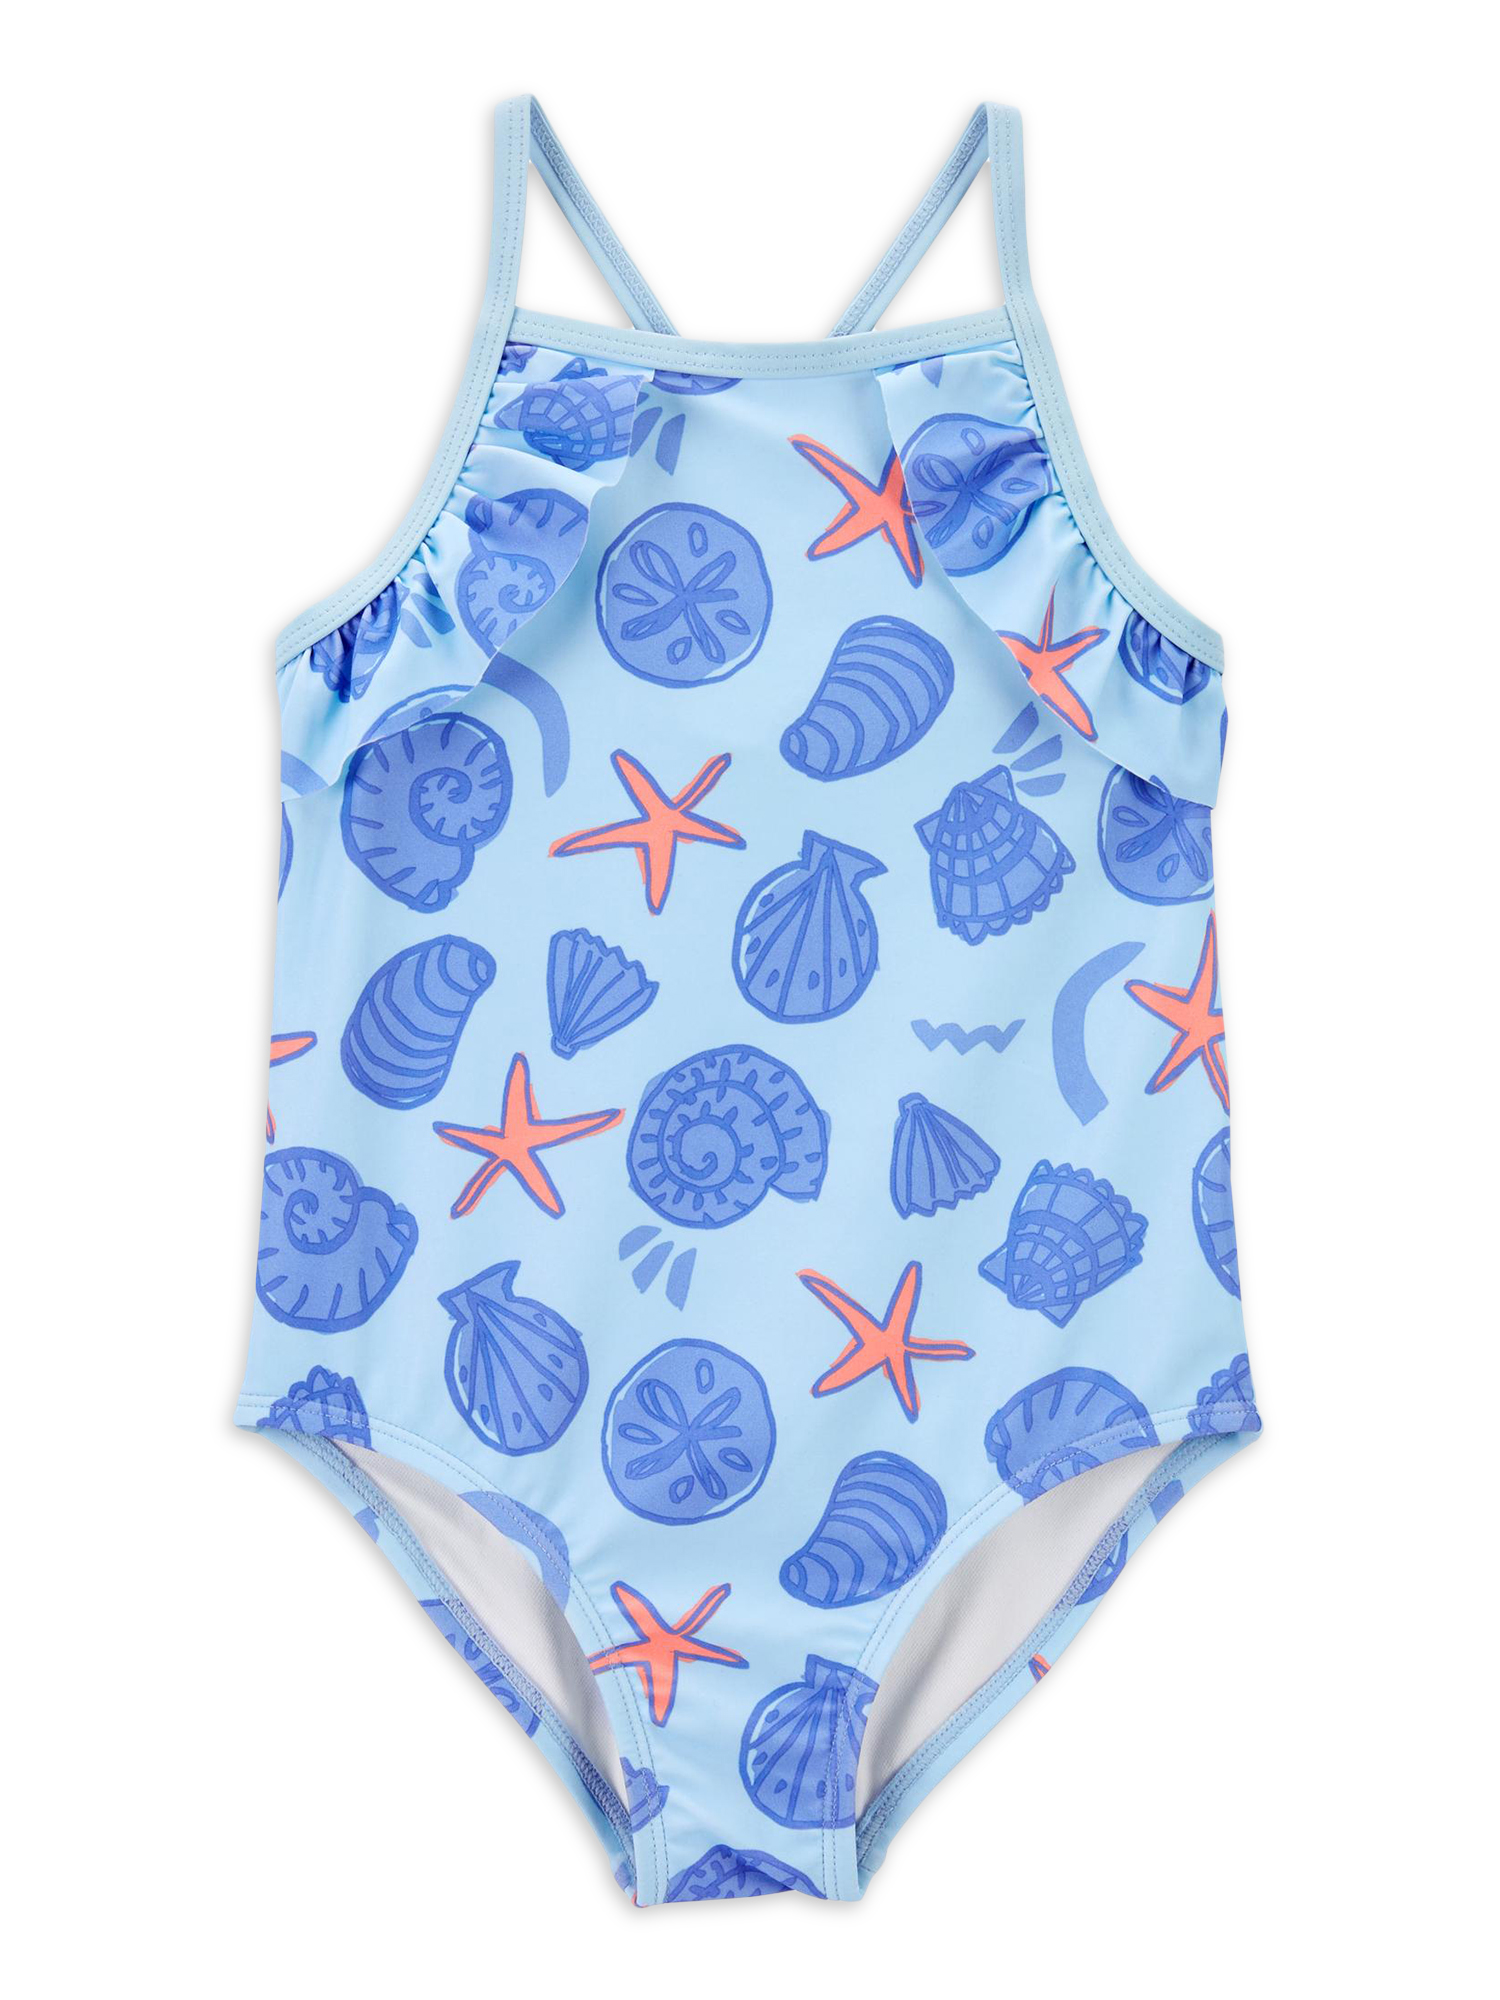 Carter's Child of Mine Toddler Girl Ruffled Swimsuit, One-Piece, Sizes 12M-5T